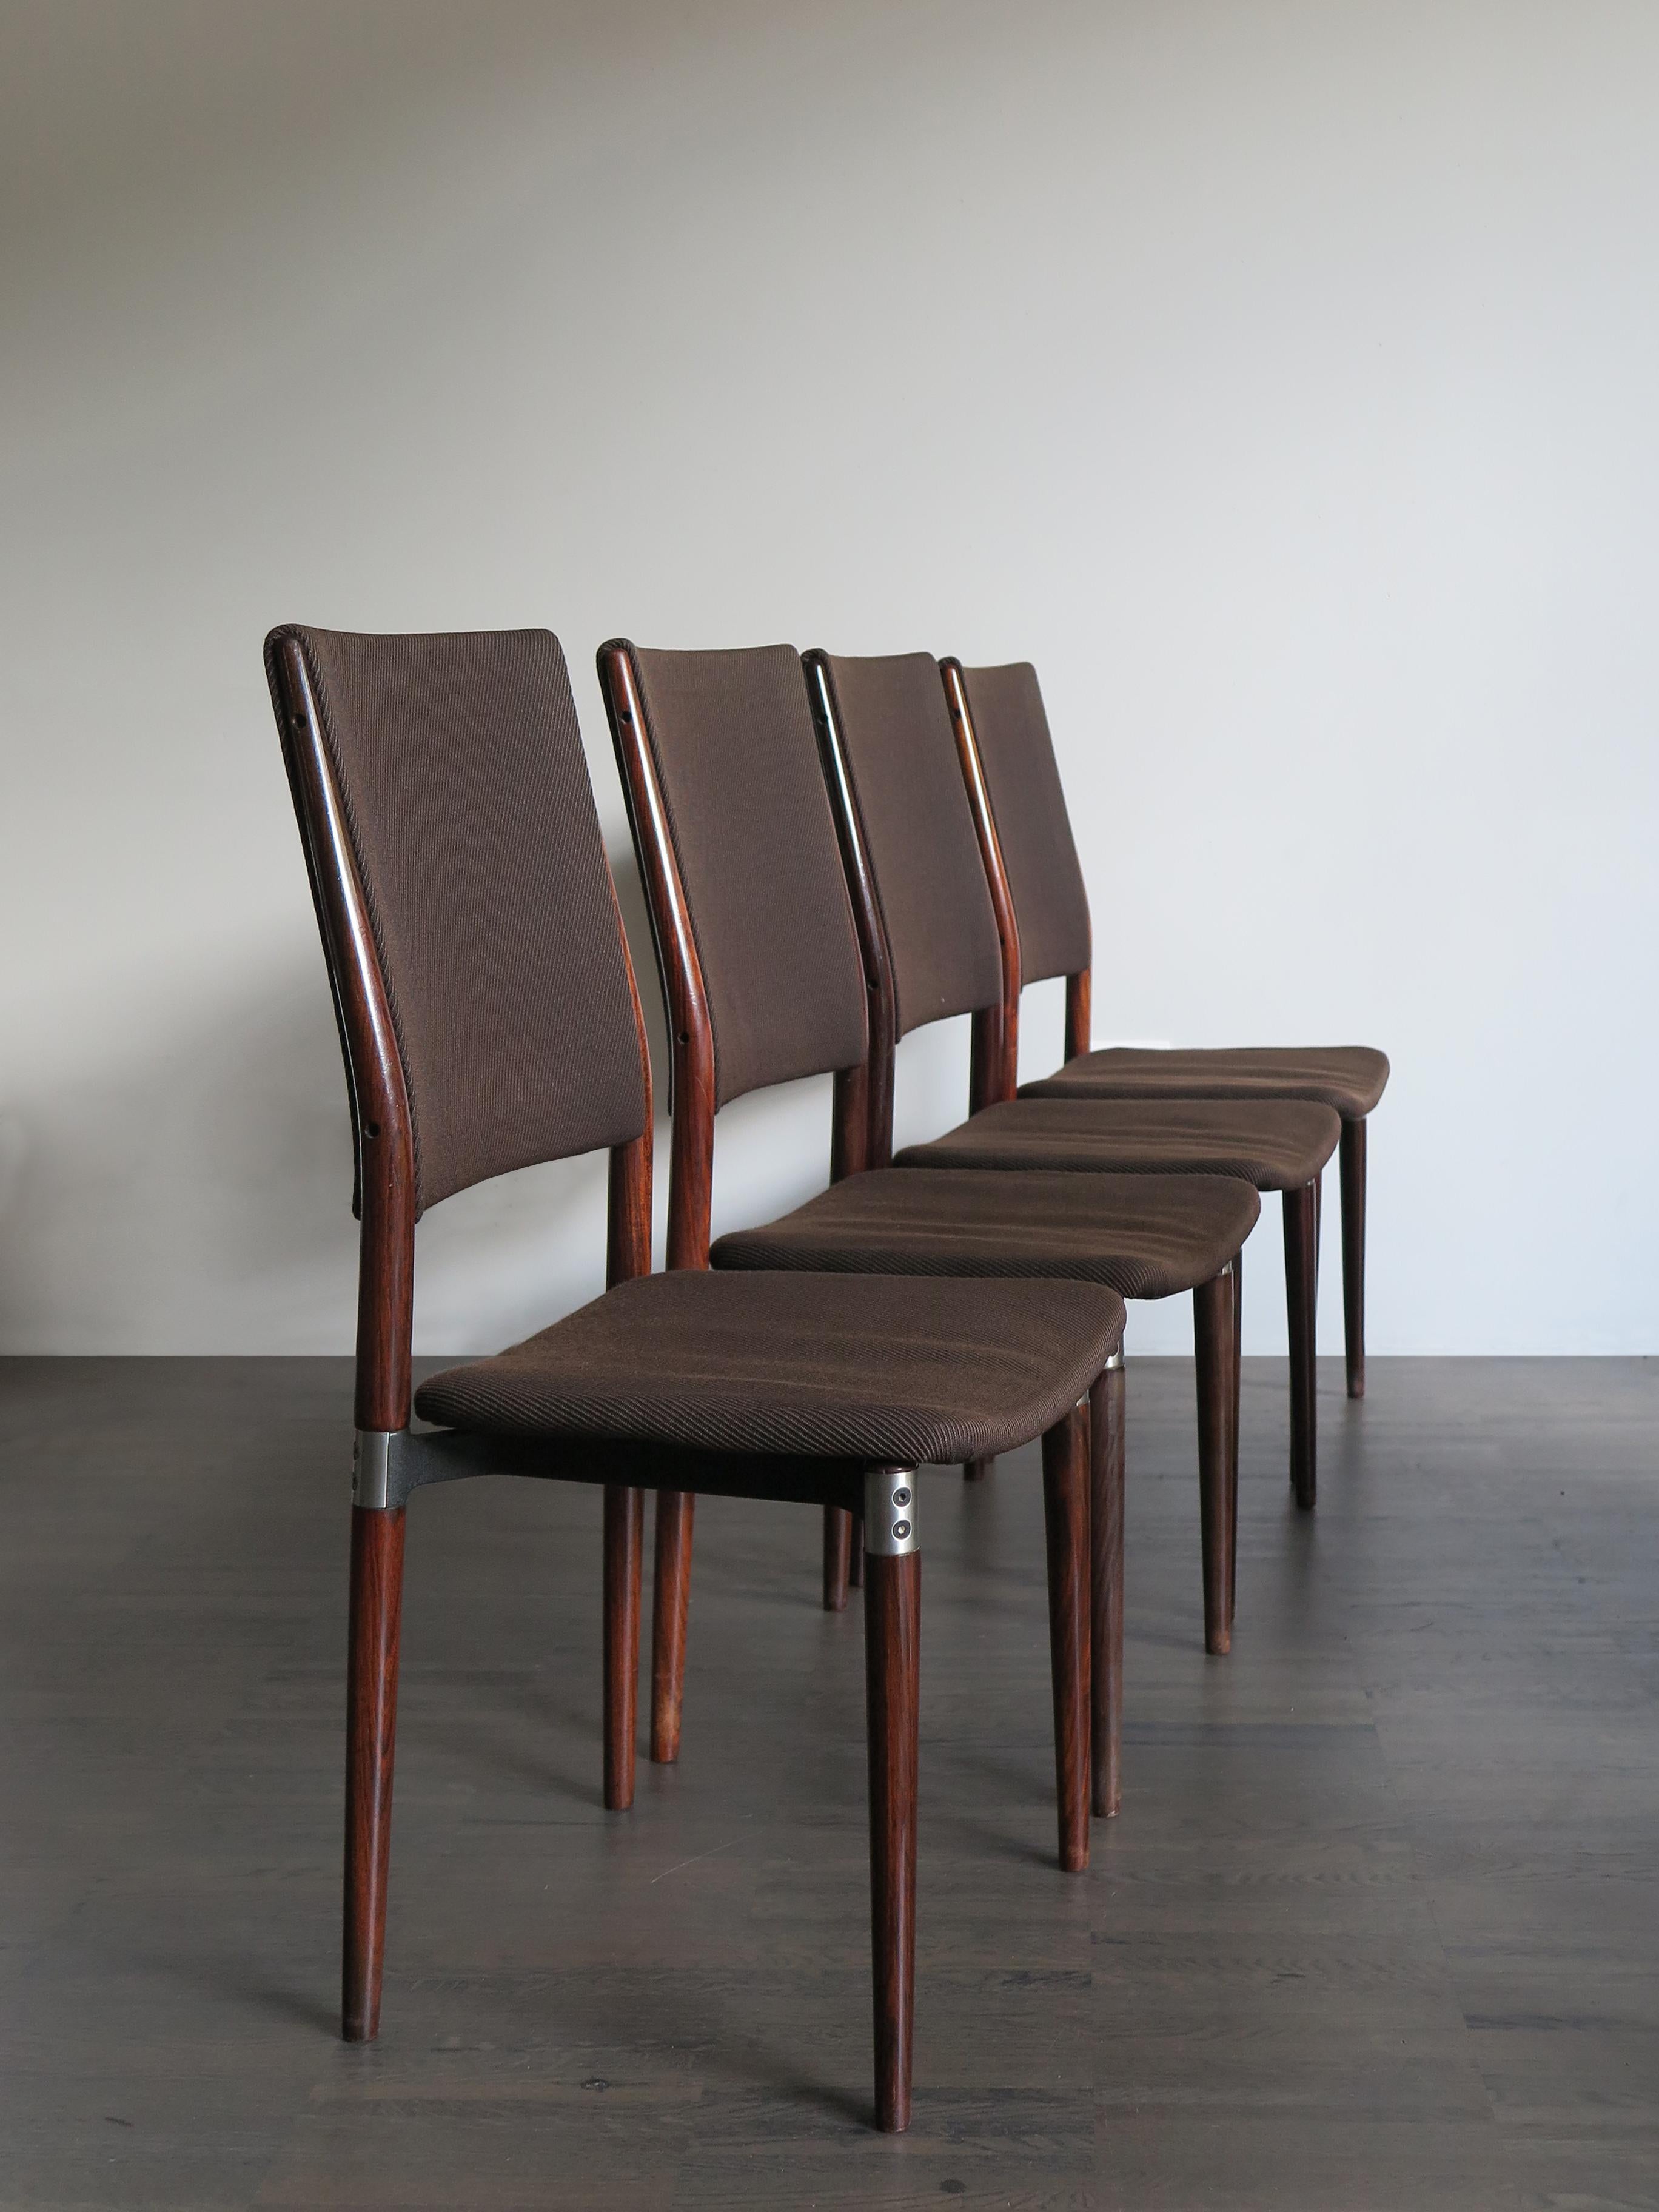 Italian dining chairs, set of four, model S81 designed by Eugenio Gerli for Tecno in 1958 with wooden and diecast aluminum frame and original fabric of the period, Mid-Century Modern design, 1950s

Please note that the chairs are original of the